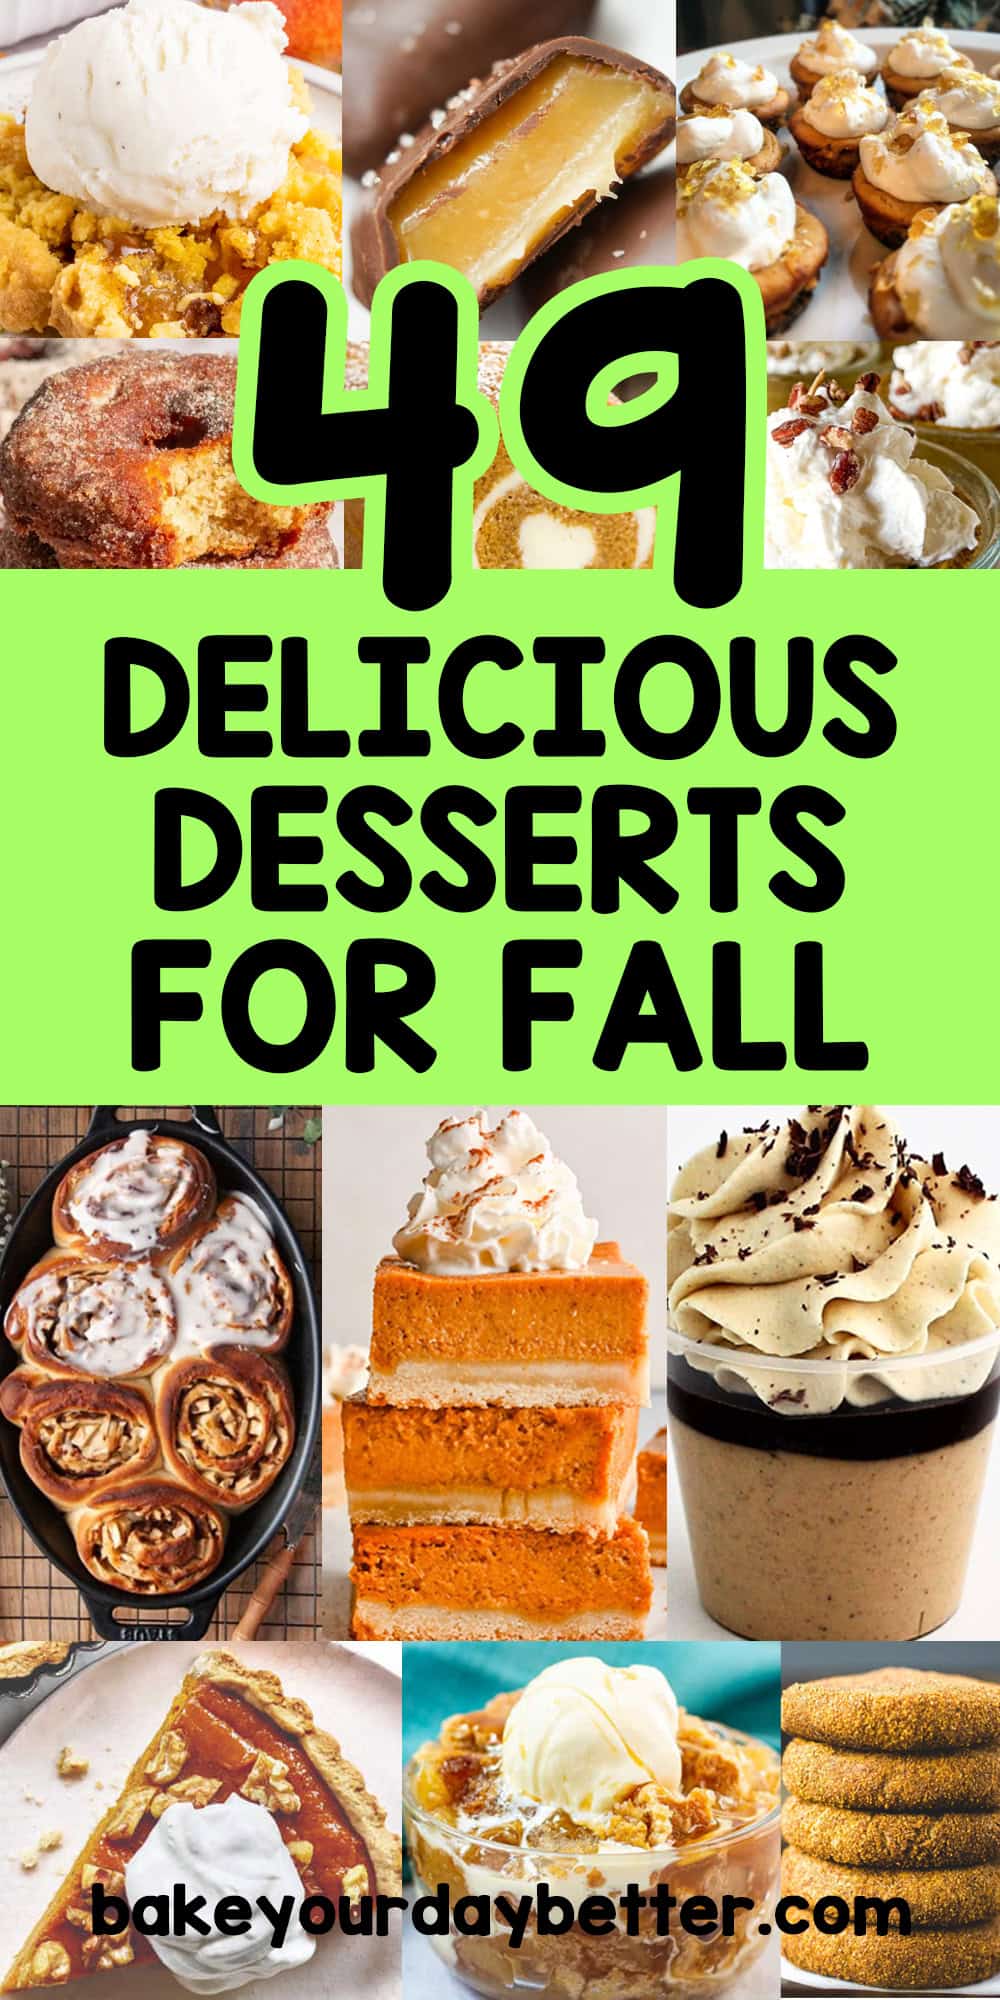 pictures of fall desserts with text overlay that says: 49 delicious desserts for fall